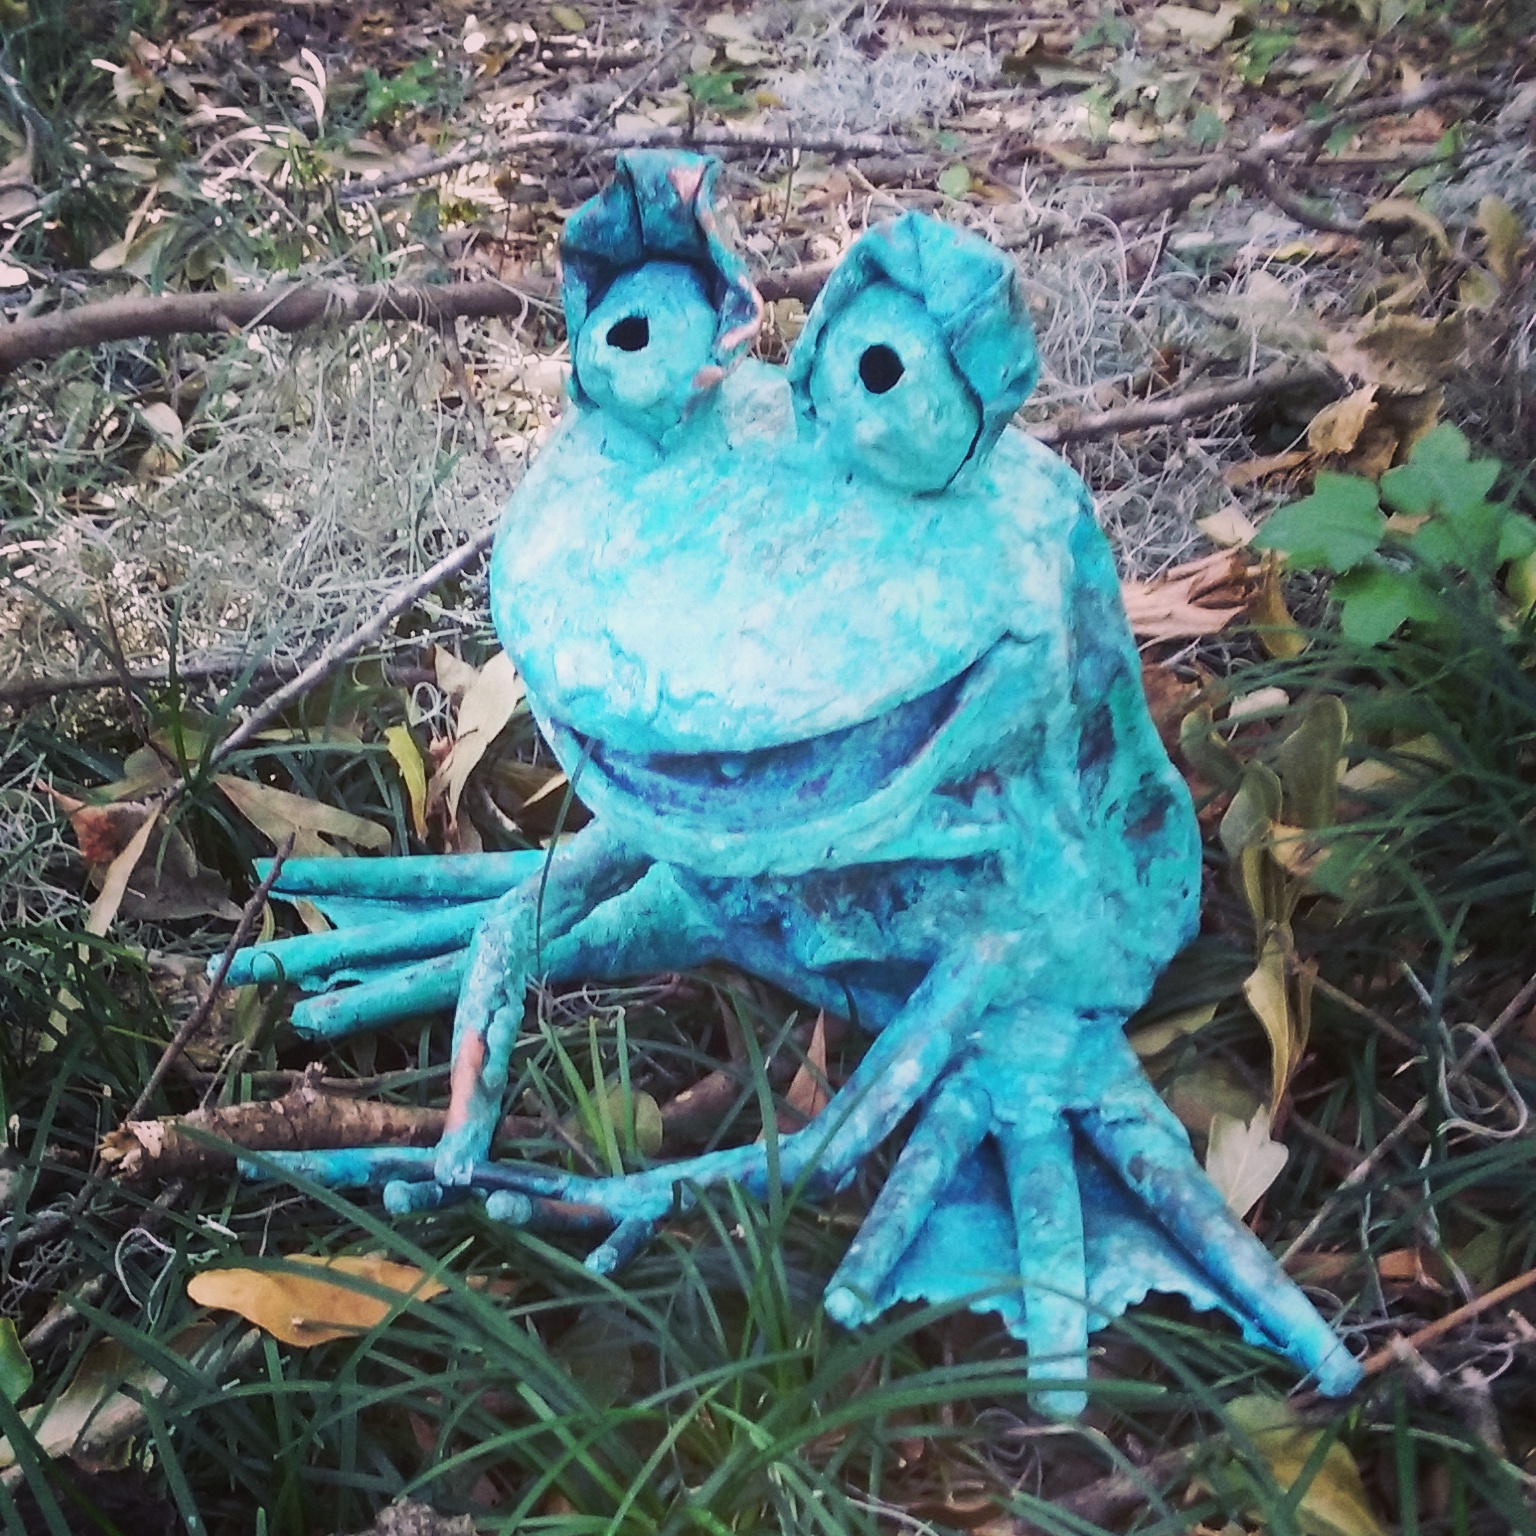 Frog sculpture by Beau Smith and Todd Miller